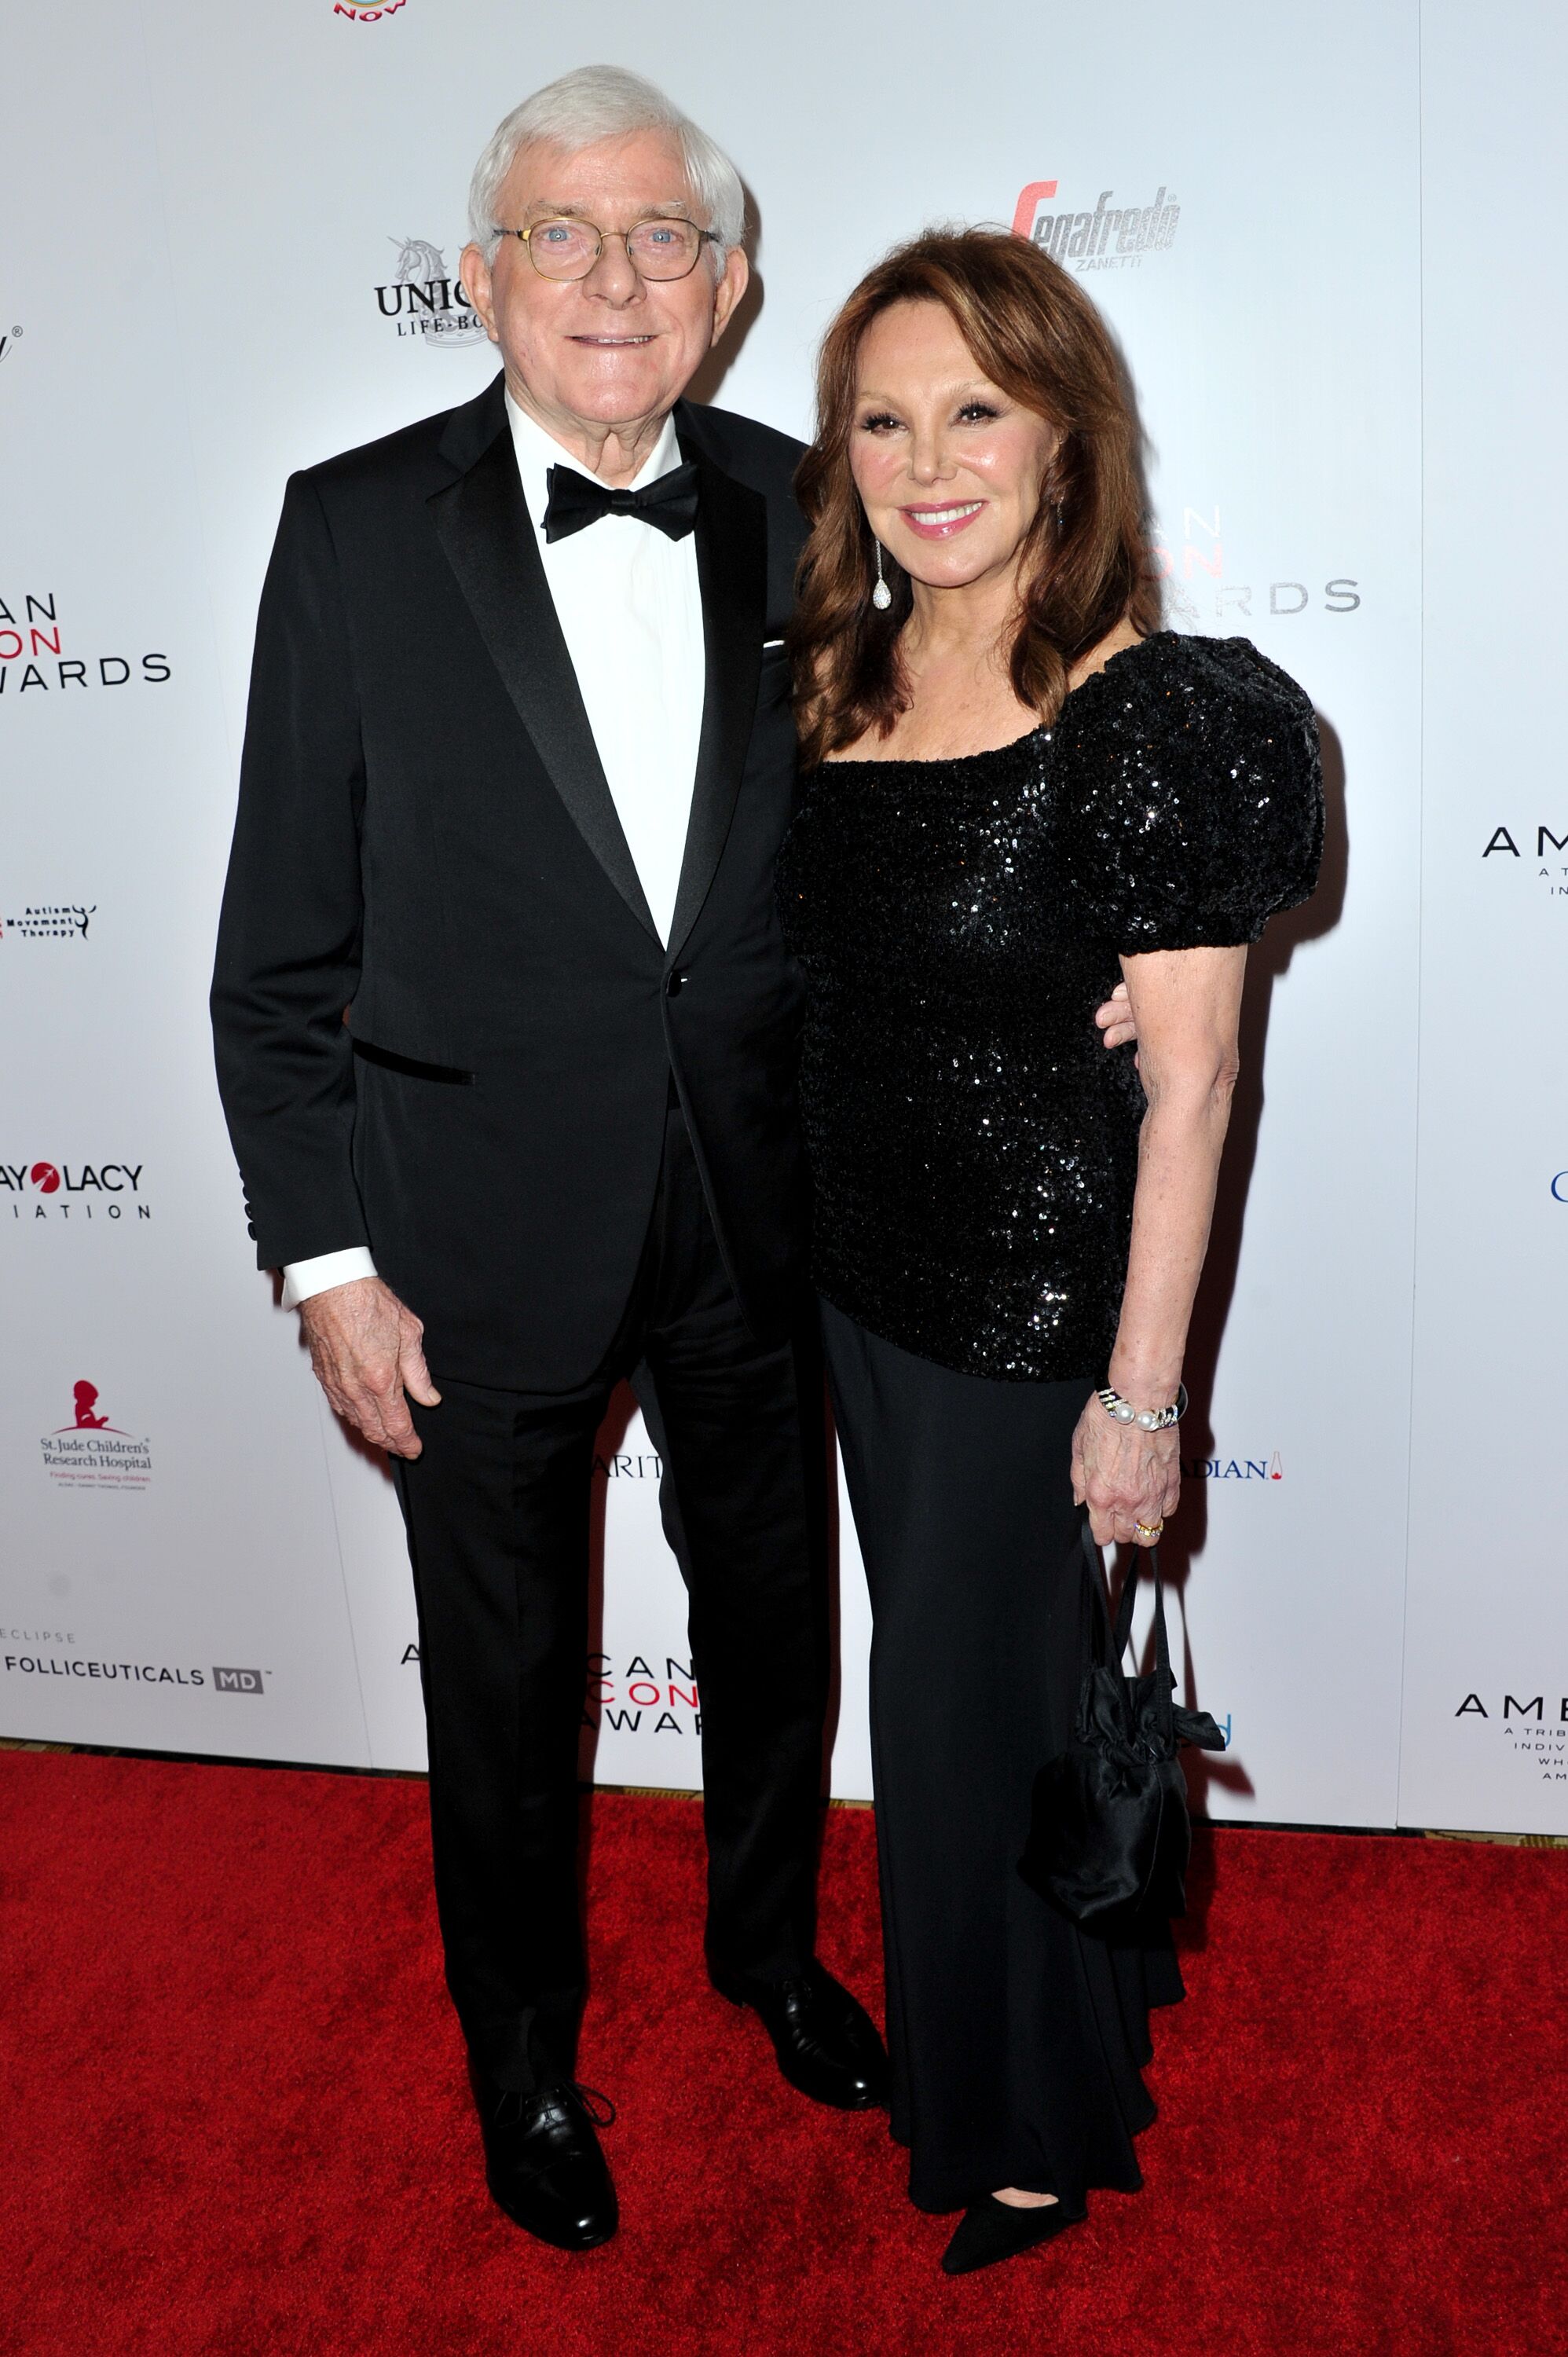 Phil Donahue and Marlo Thomas attend the American Icon Awards. | Source: Getty Images